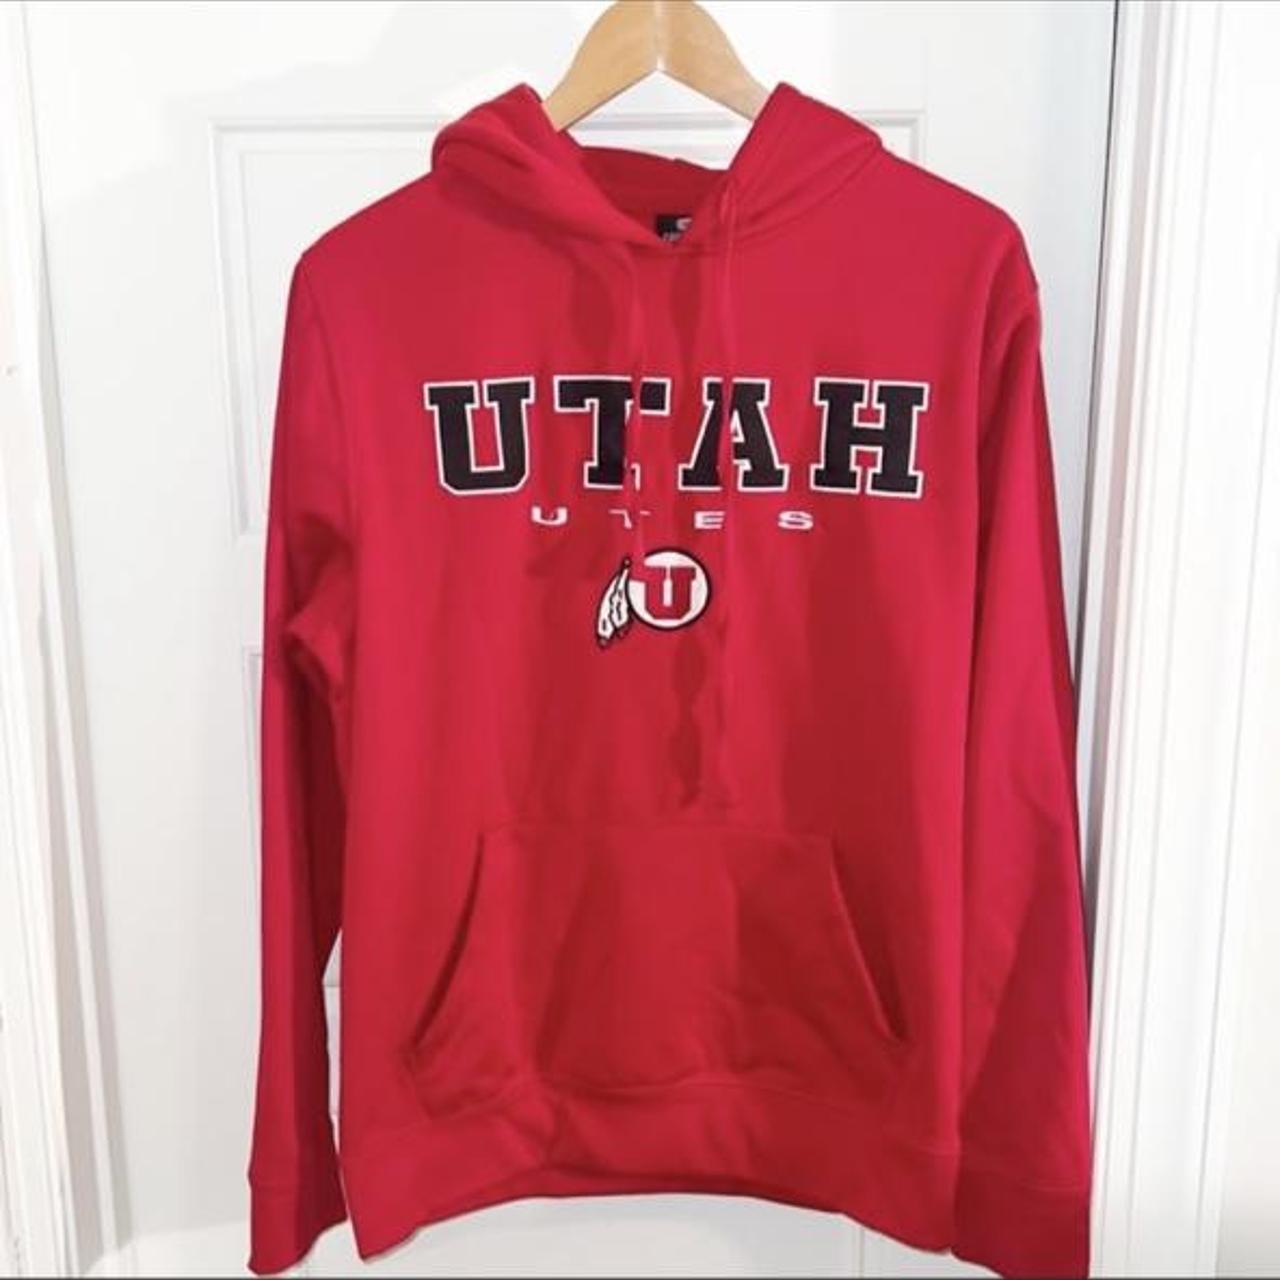 Product Image 1 - Utah Utes Pullover Hoodies

This pullover